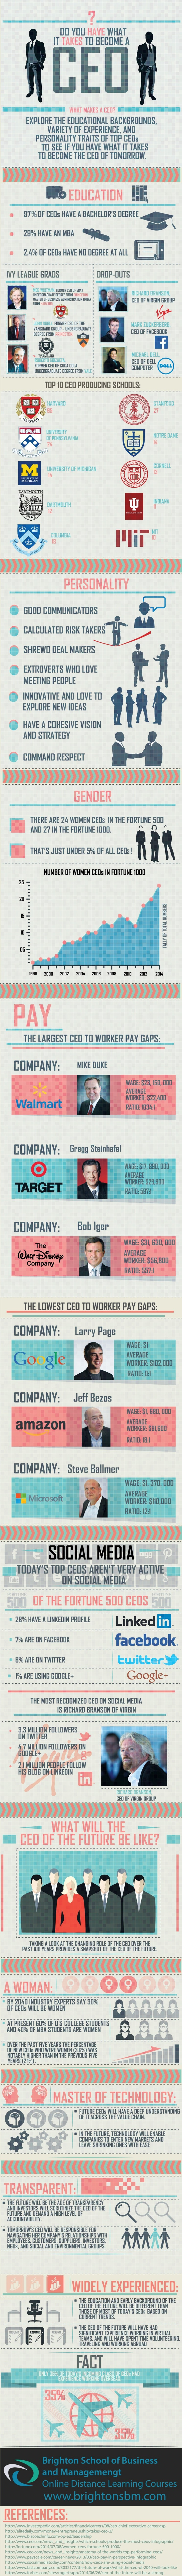 Do you have what it takes to be a CEO - BSBM Infographic